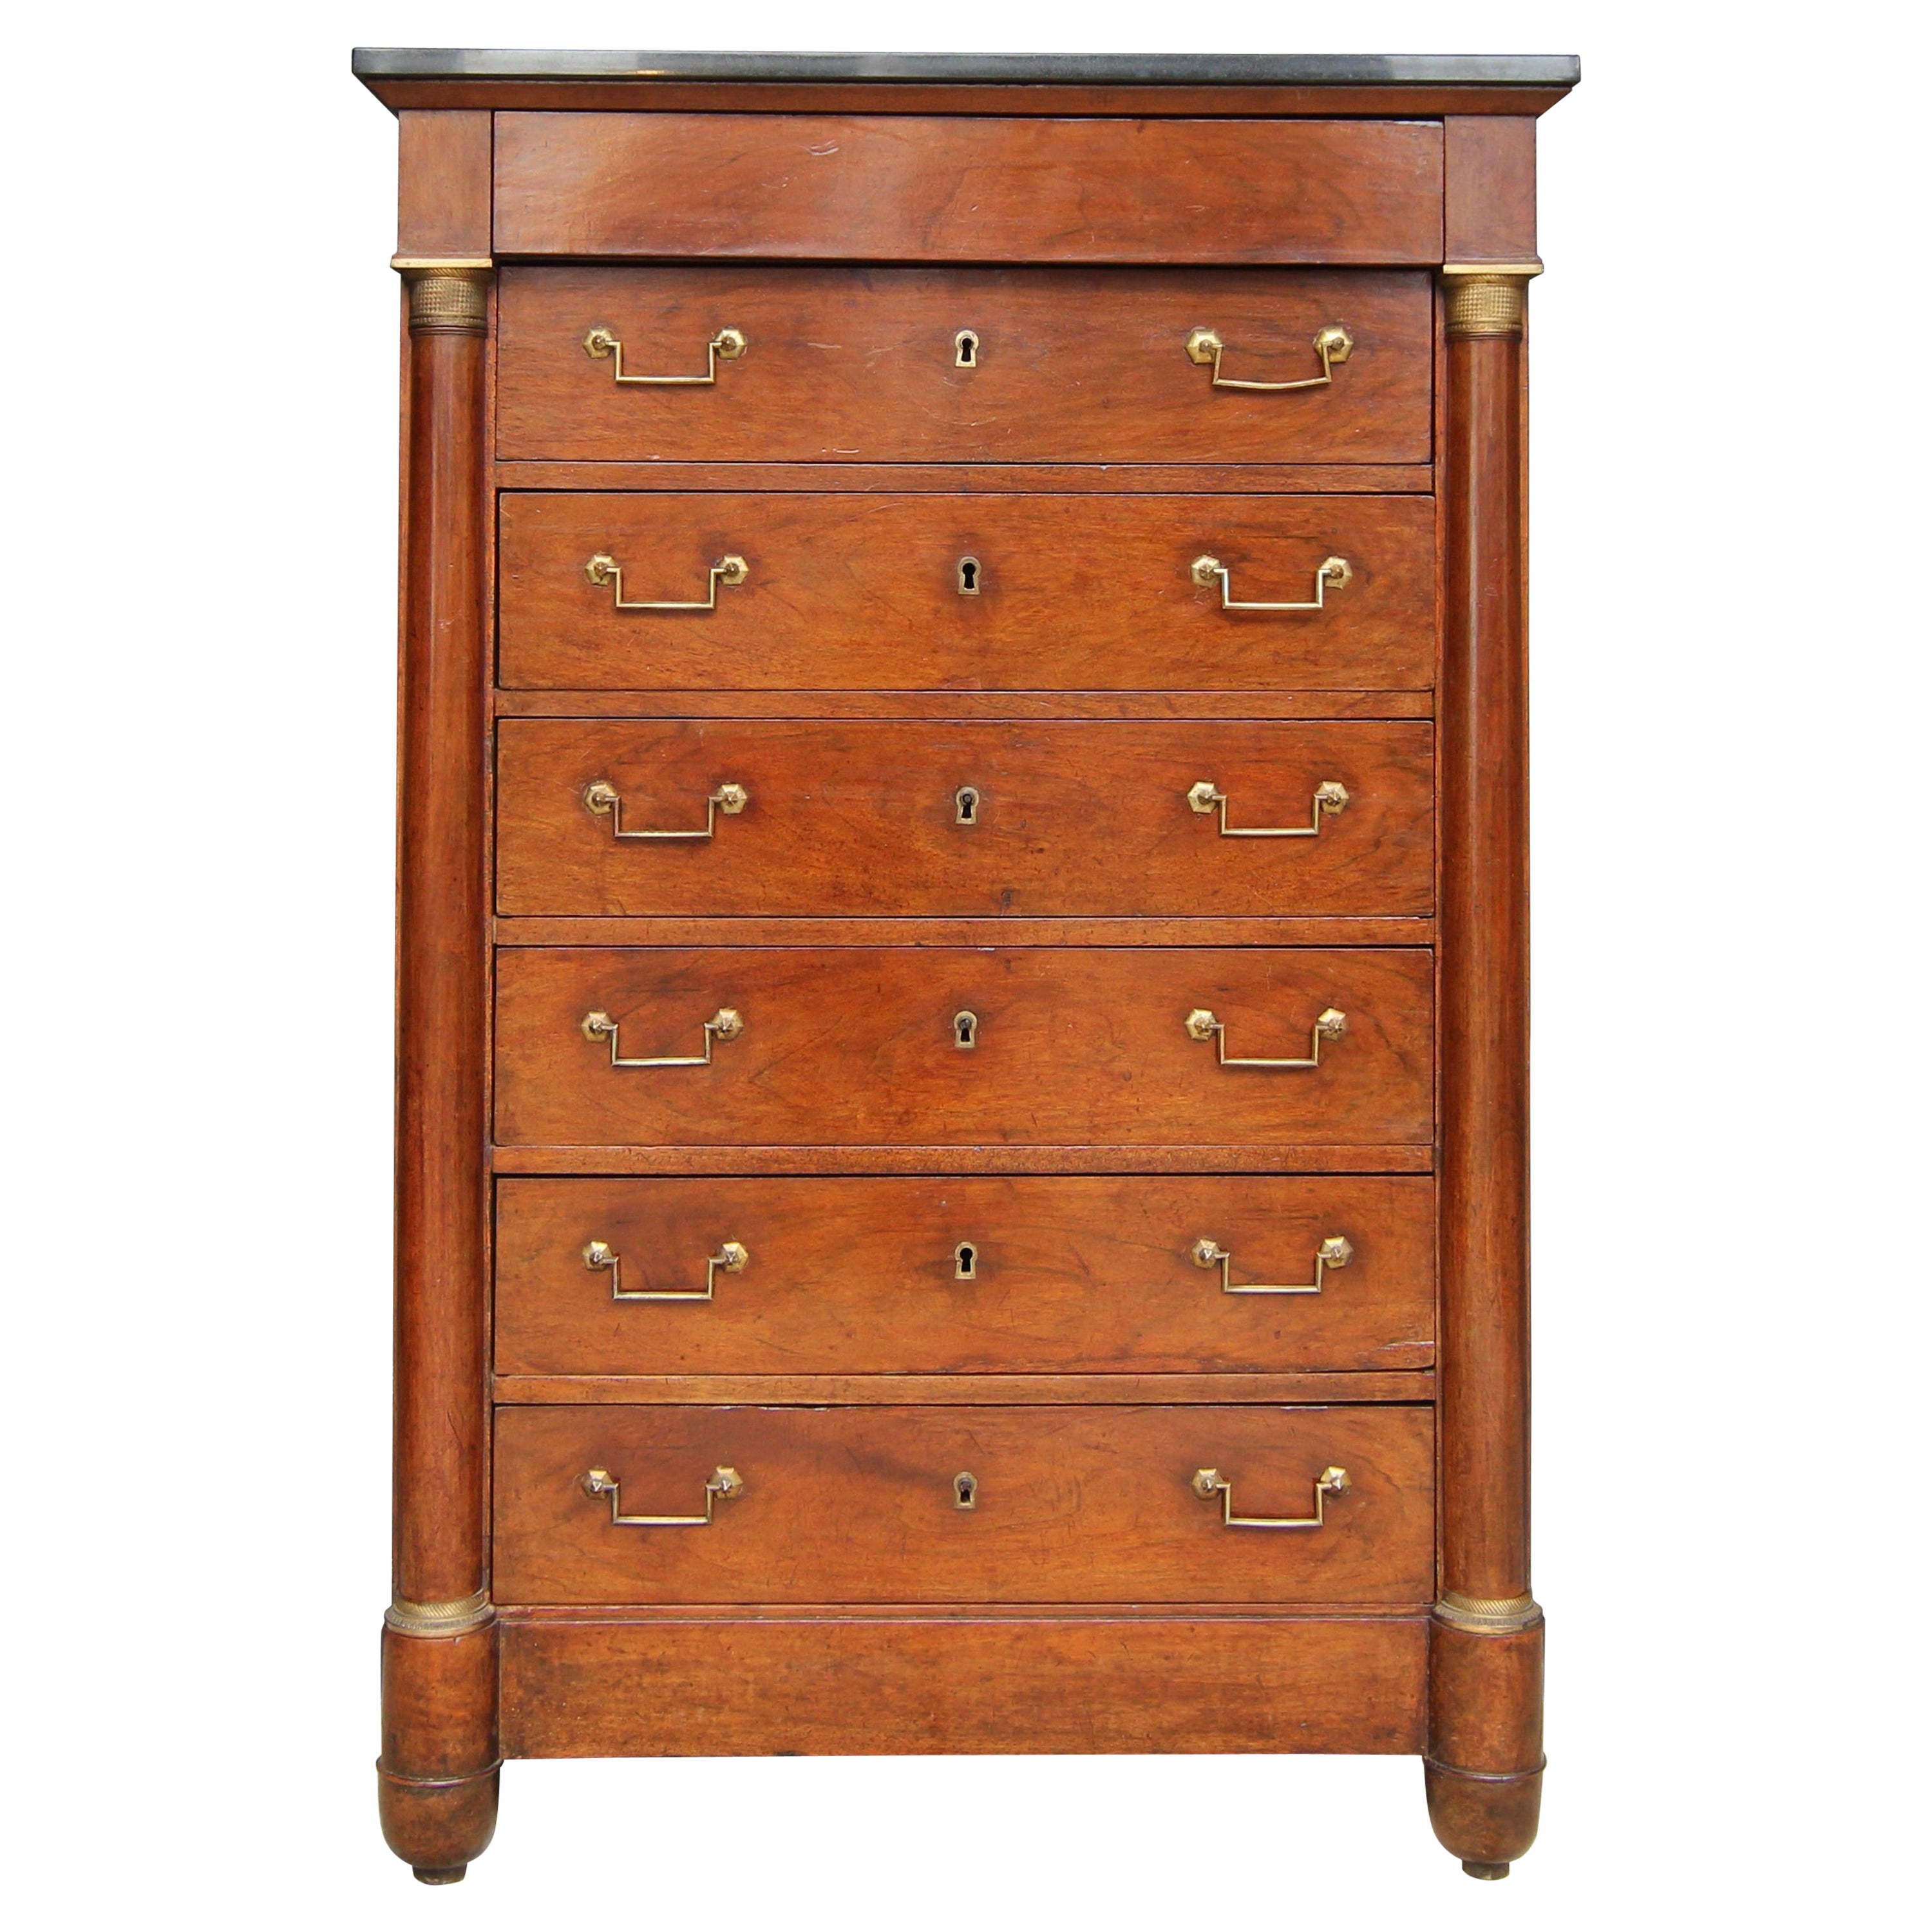 19th Century French Empire Semainier Chest of Drawers